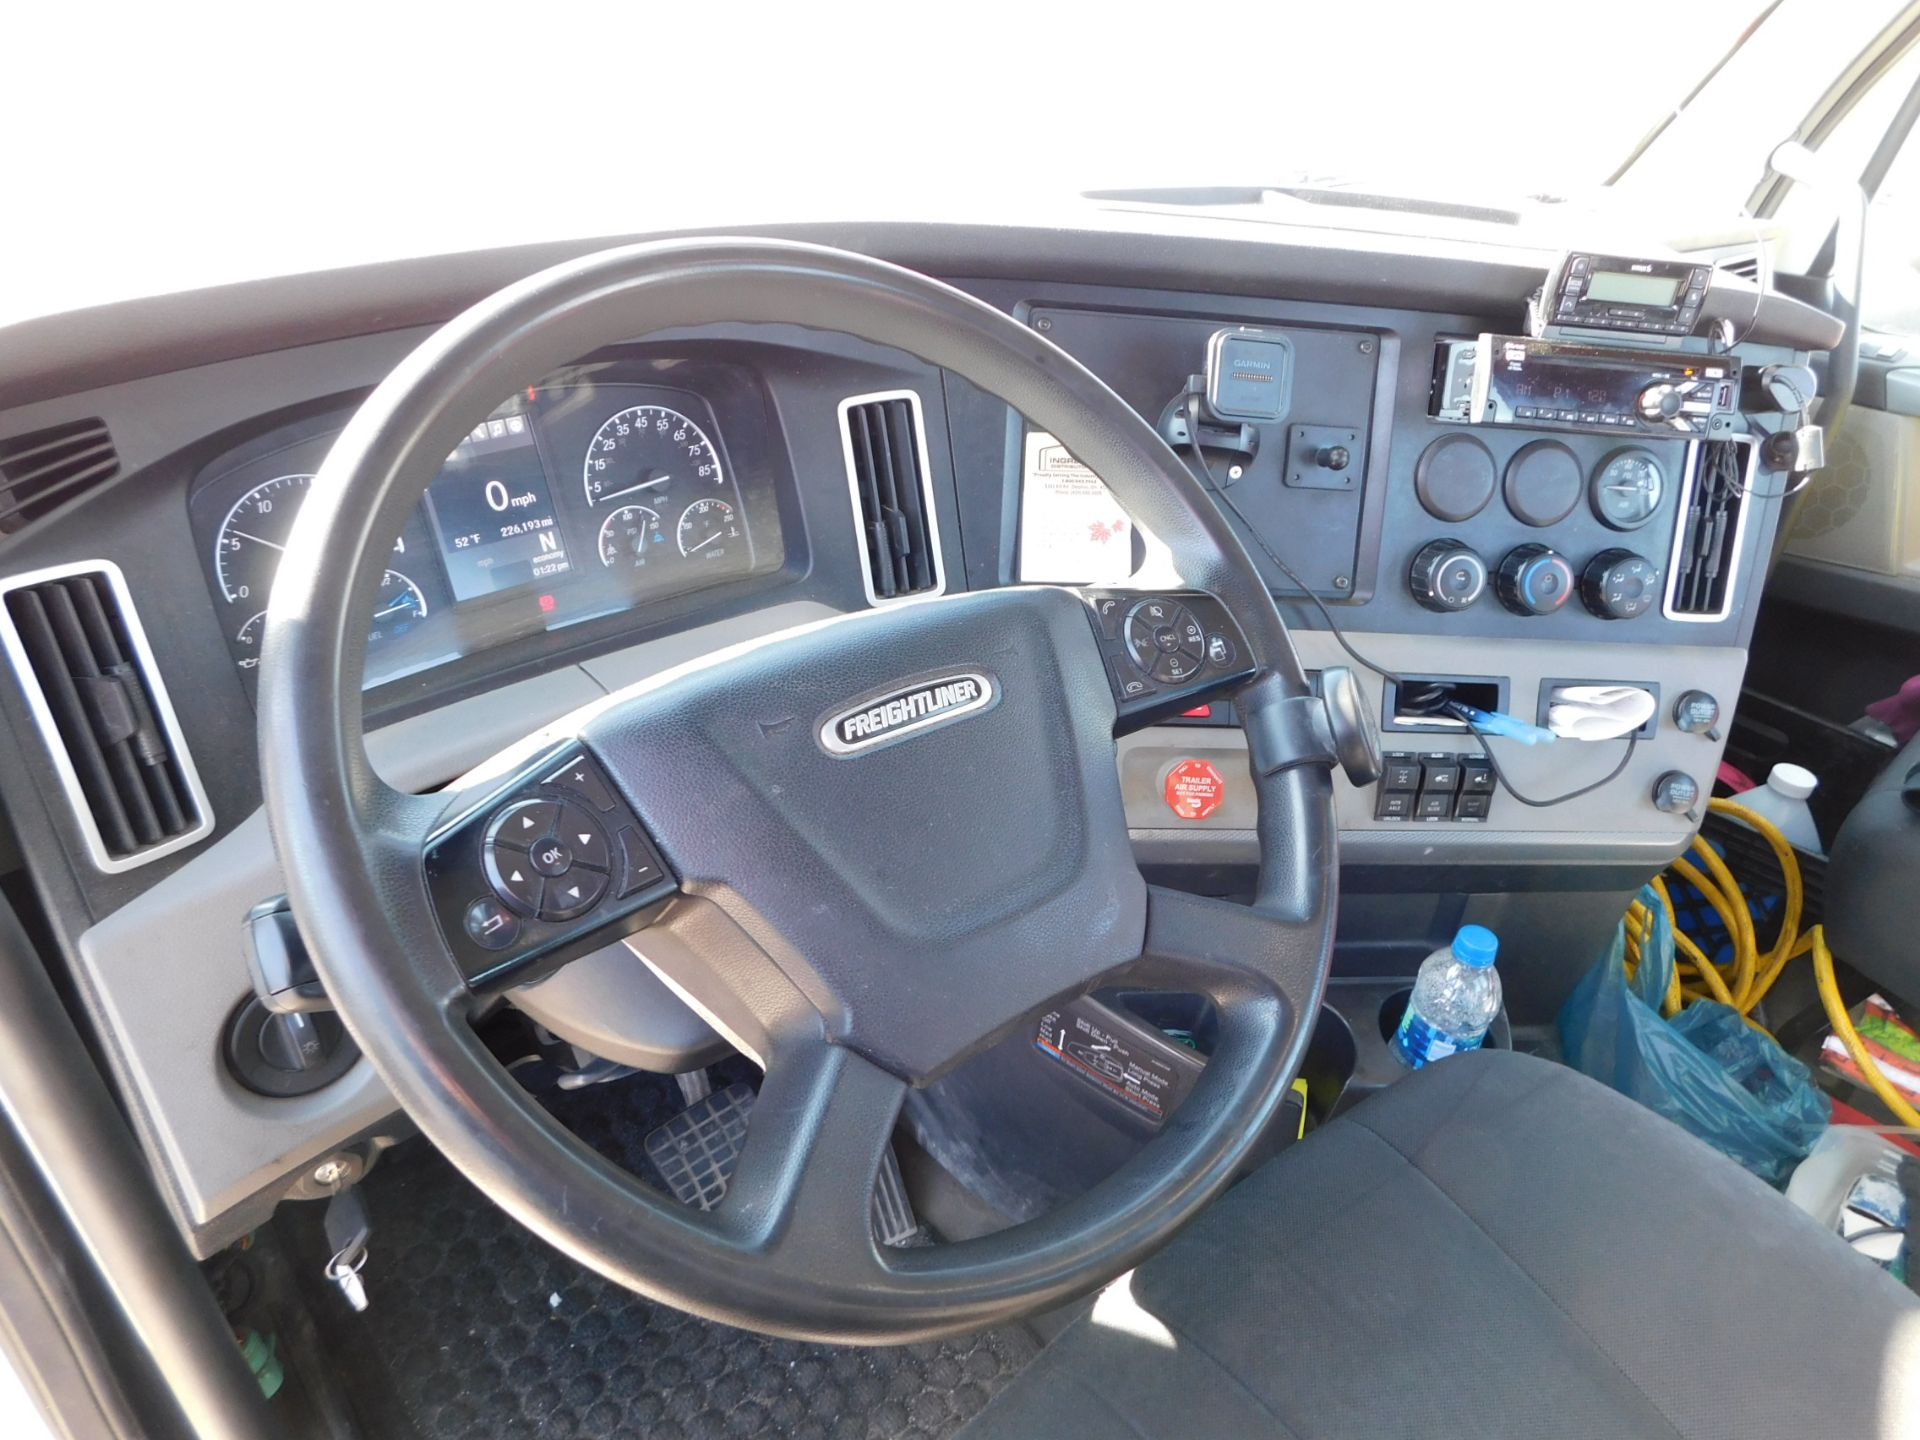 2019 Freightliner Tandem Axle Cascadia 126 Truck Tractor, Day Cab, 525 HP Detroit DD13 Diesel - Image 23 of 25